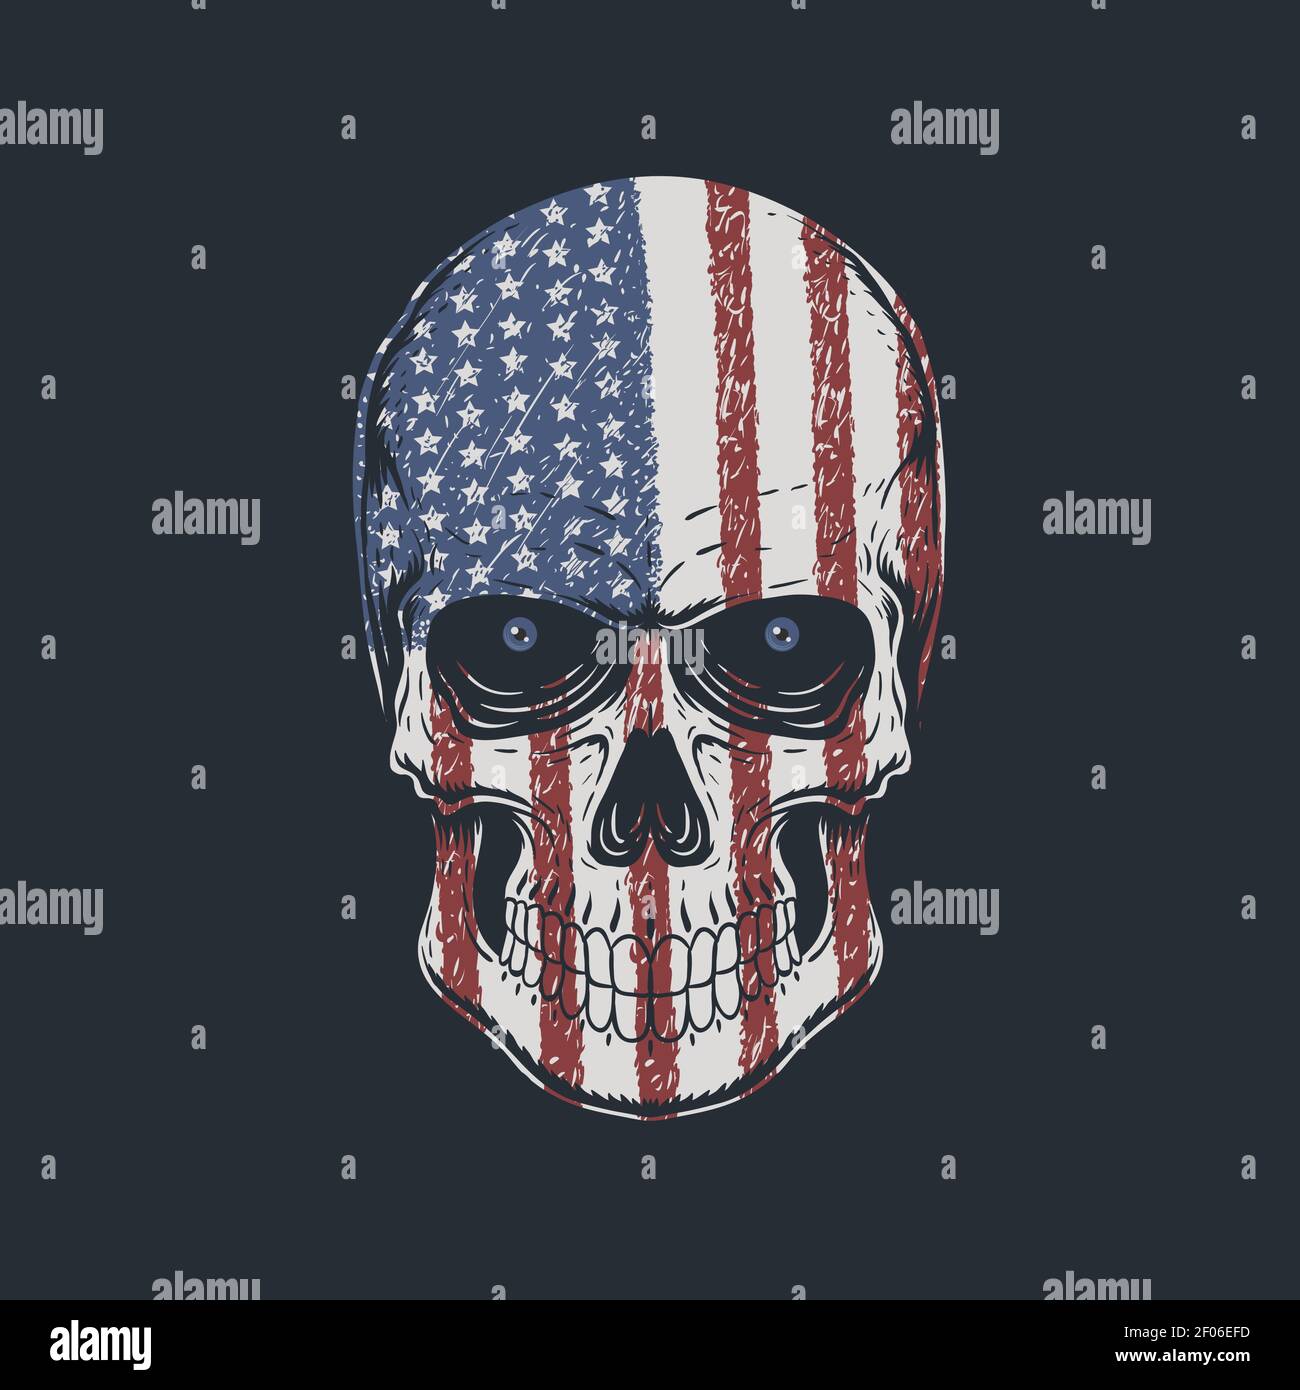 Skull head America illustration for your company or brand Stock Vector